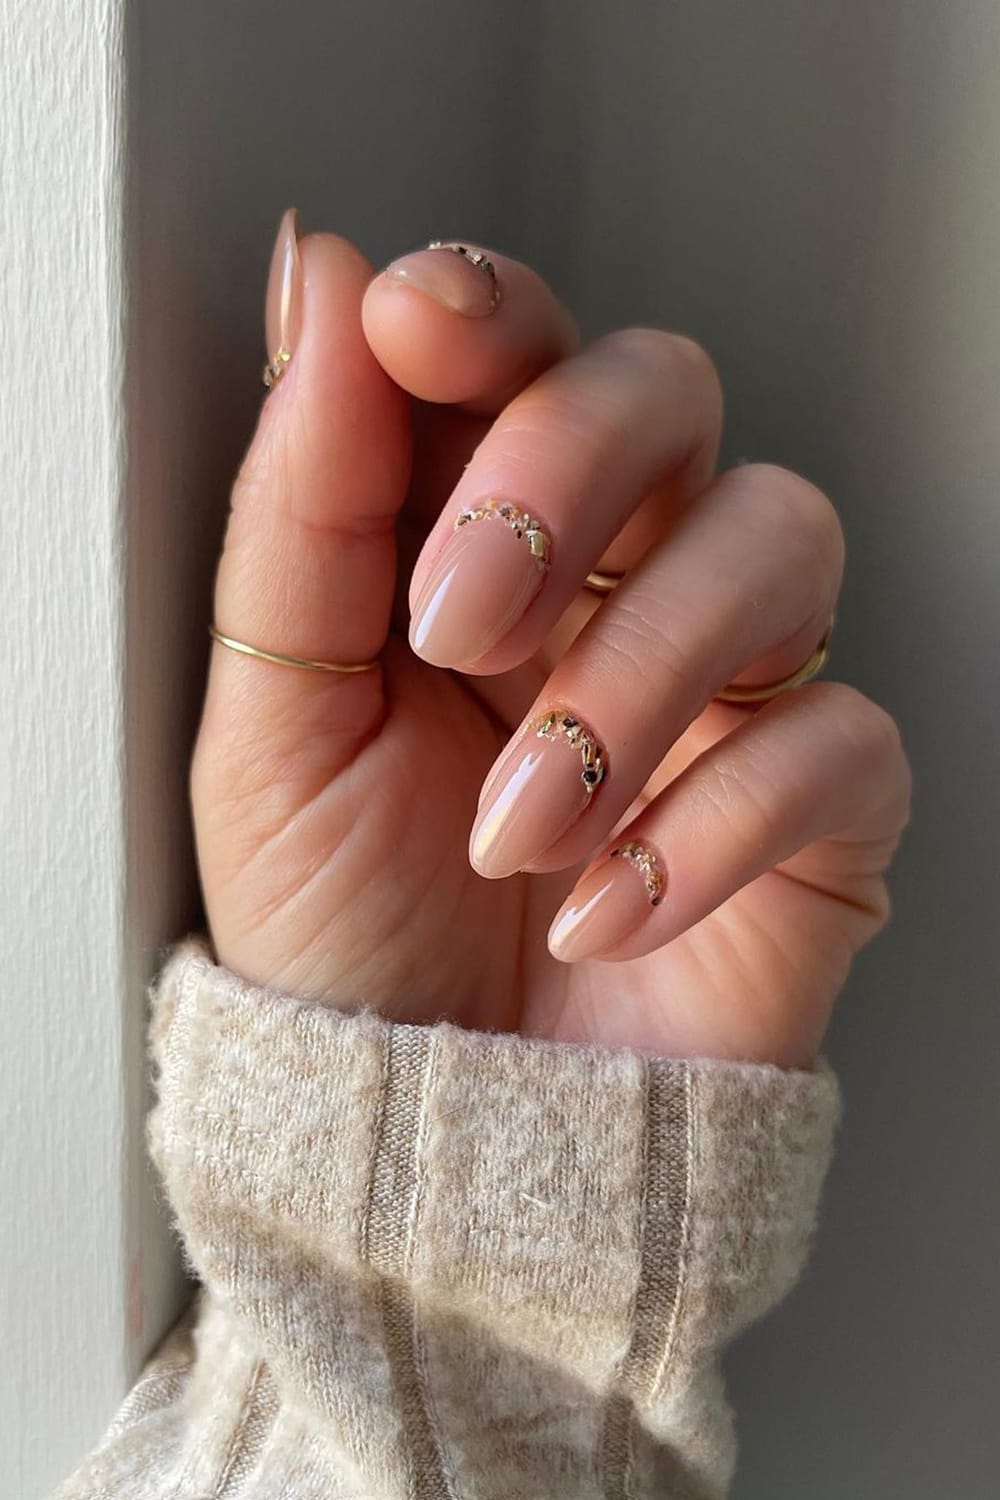 Exquisite shell cuff nails